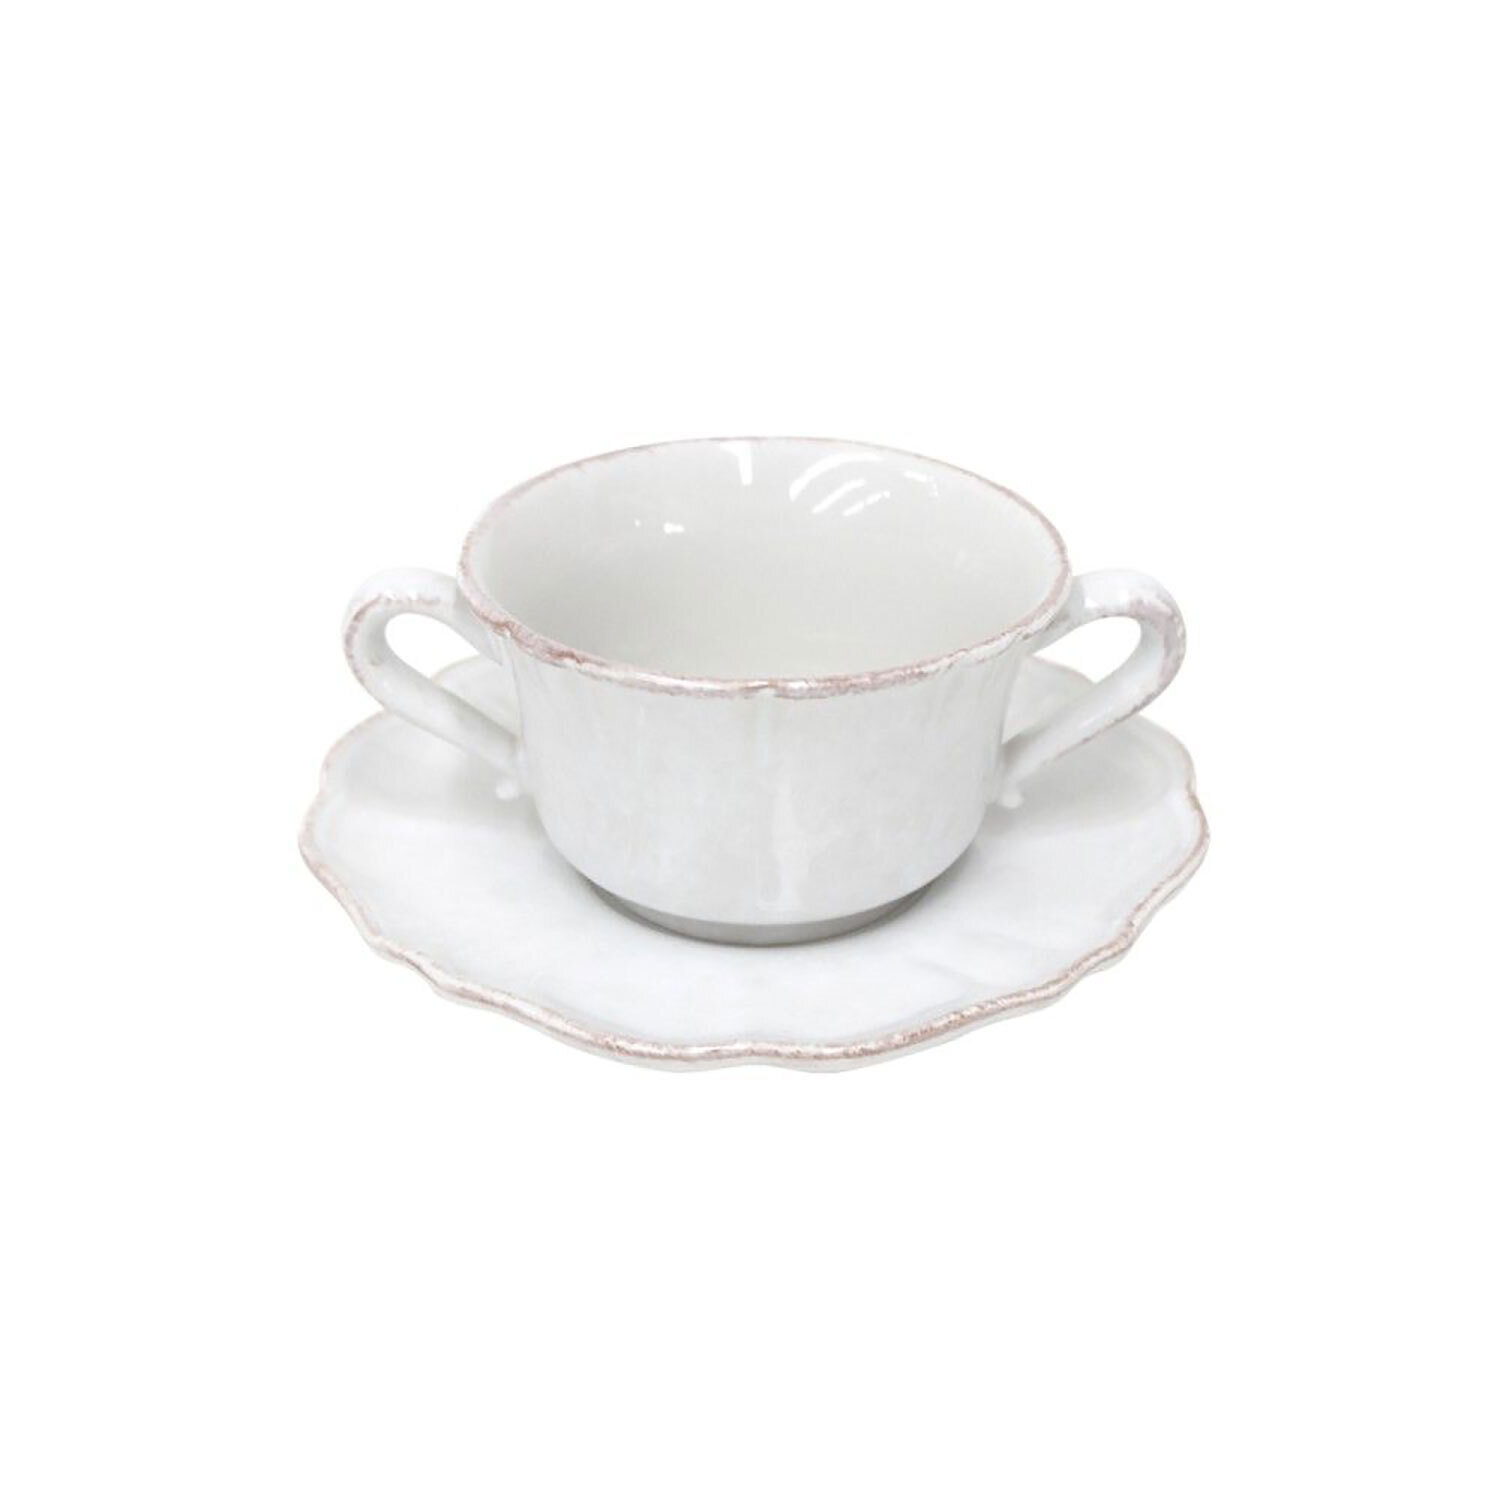 Casafina Impressions White Consomme Cup & Saucer Set of 6 IM511-WHI